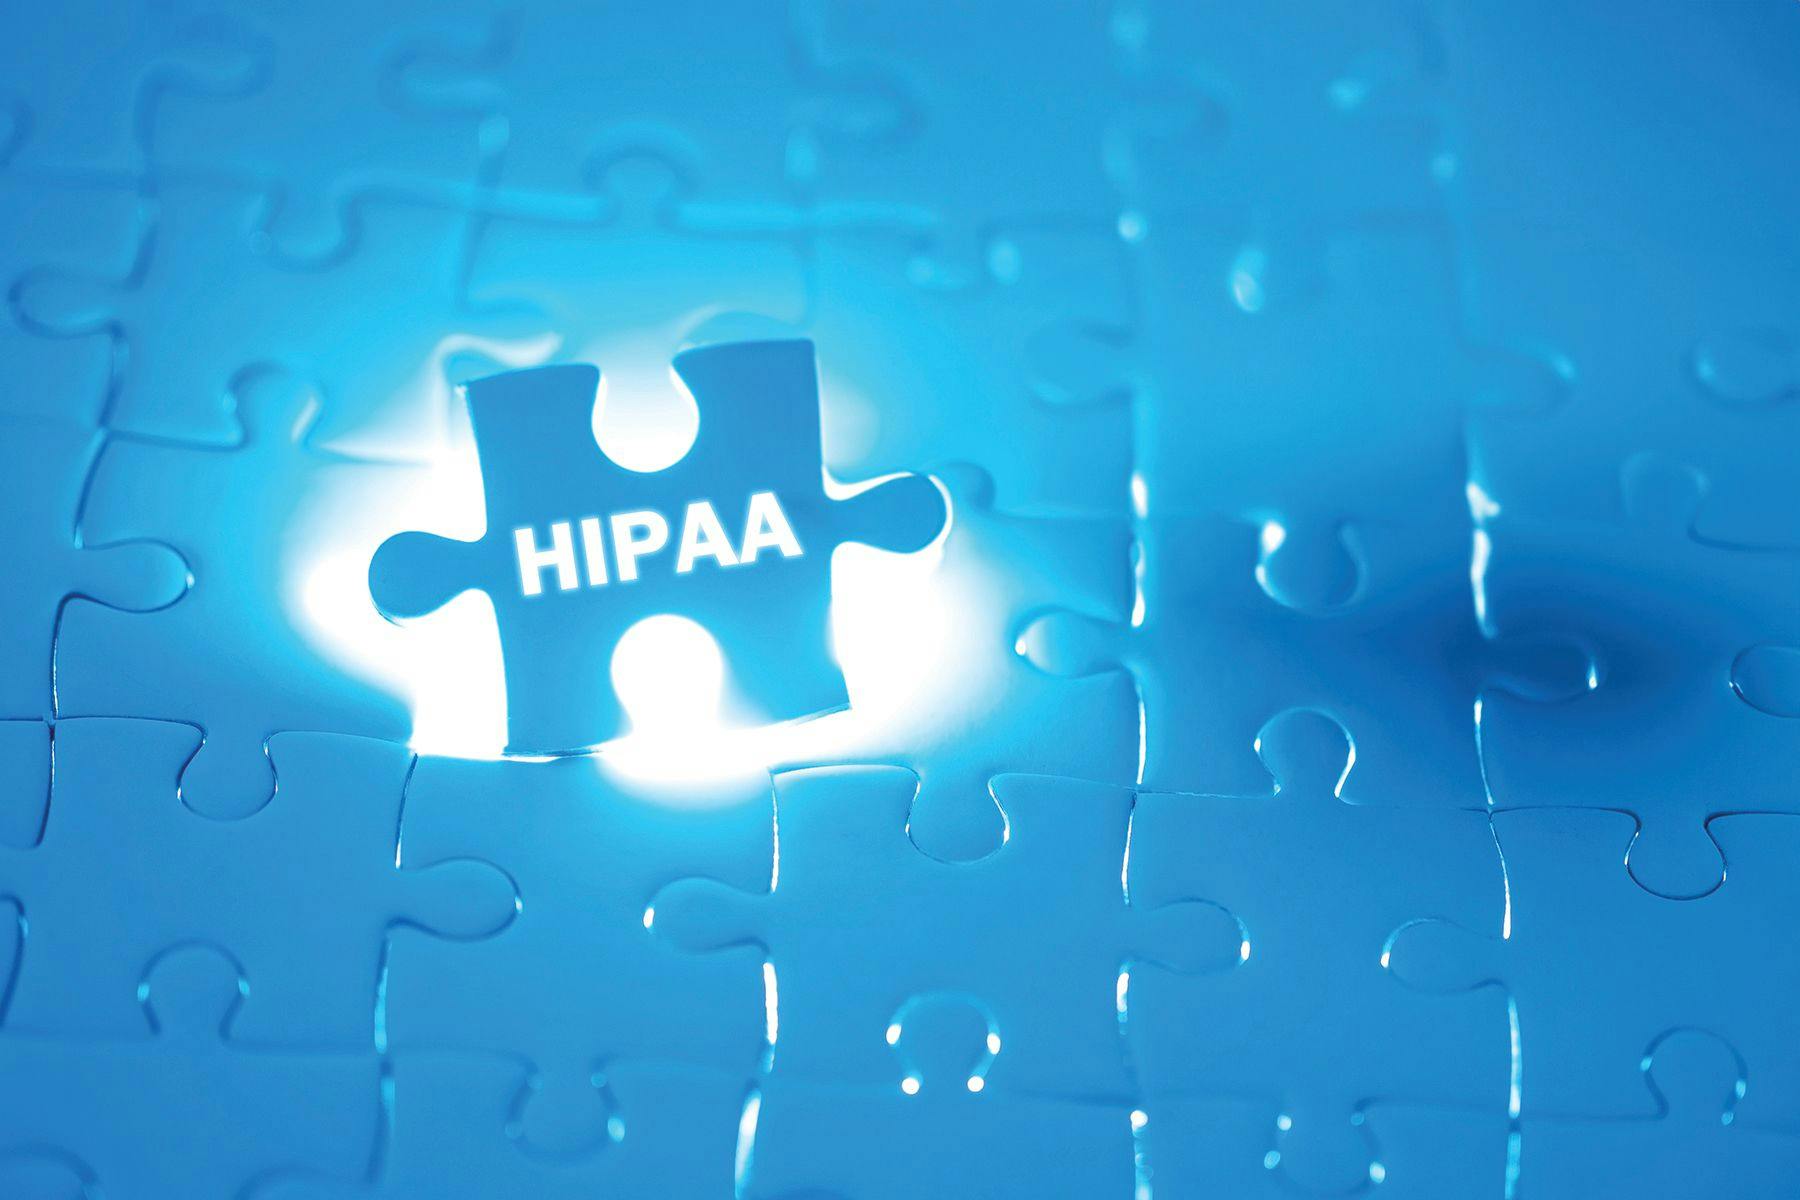 HIPAA: Is It Still Significant? | Image Credit: © suthisak / stock.adobe.com